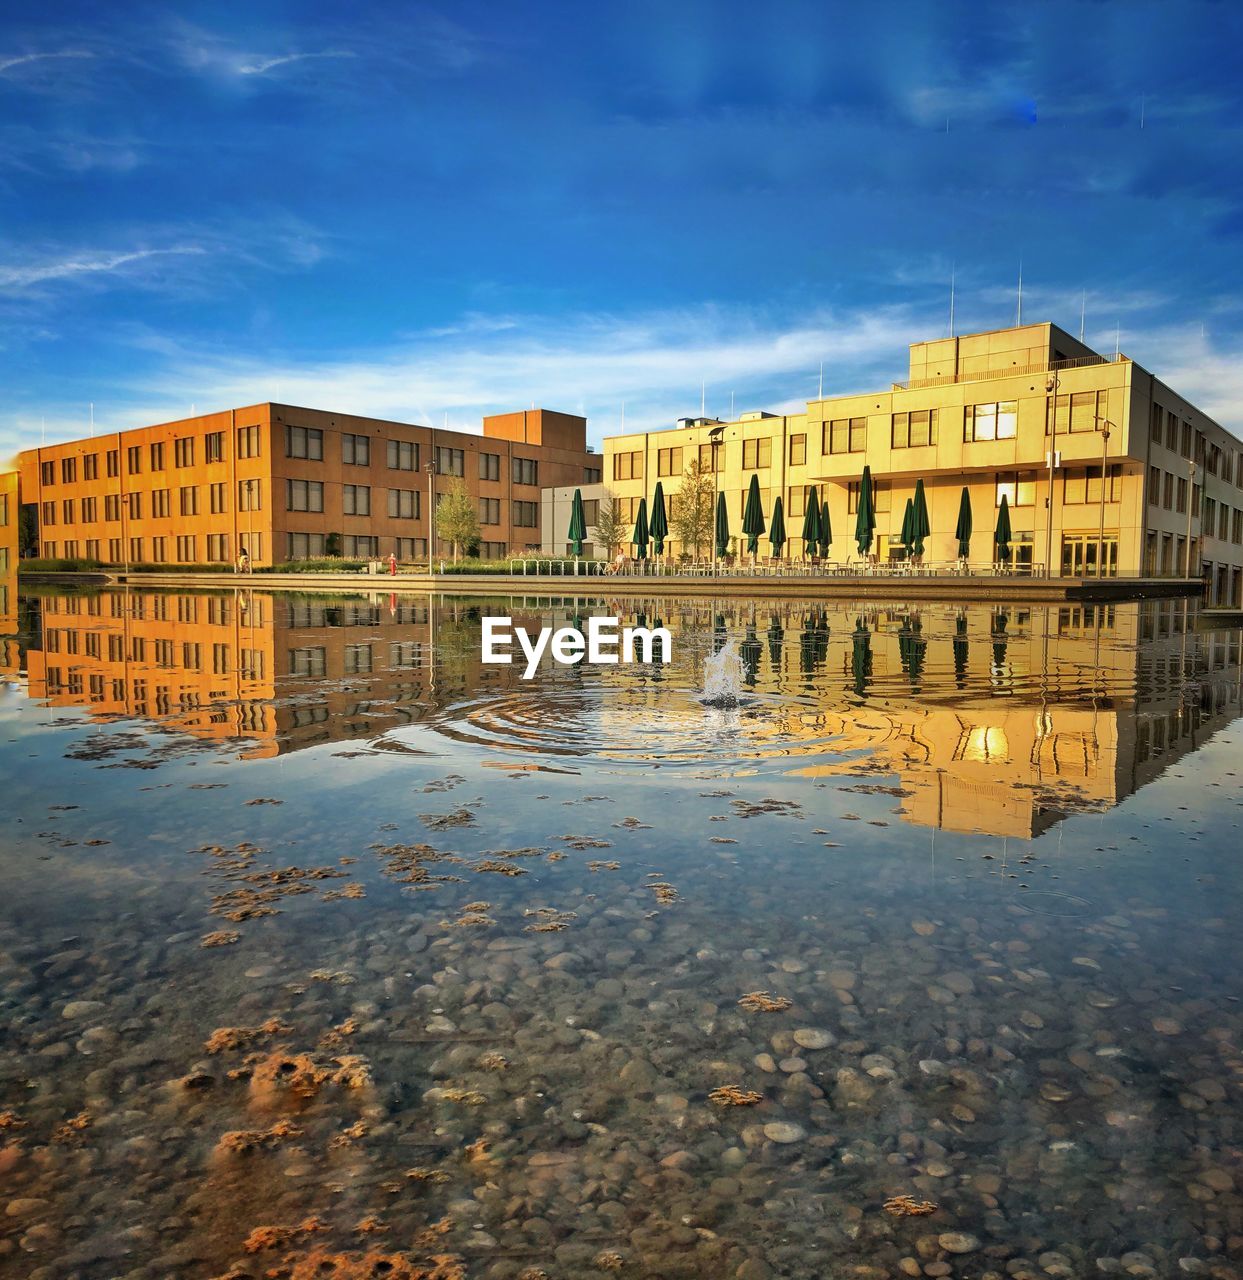 REFLECTION OF BUILDINGS IN WATER